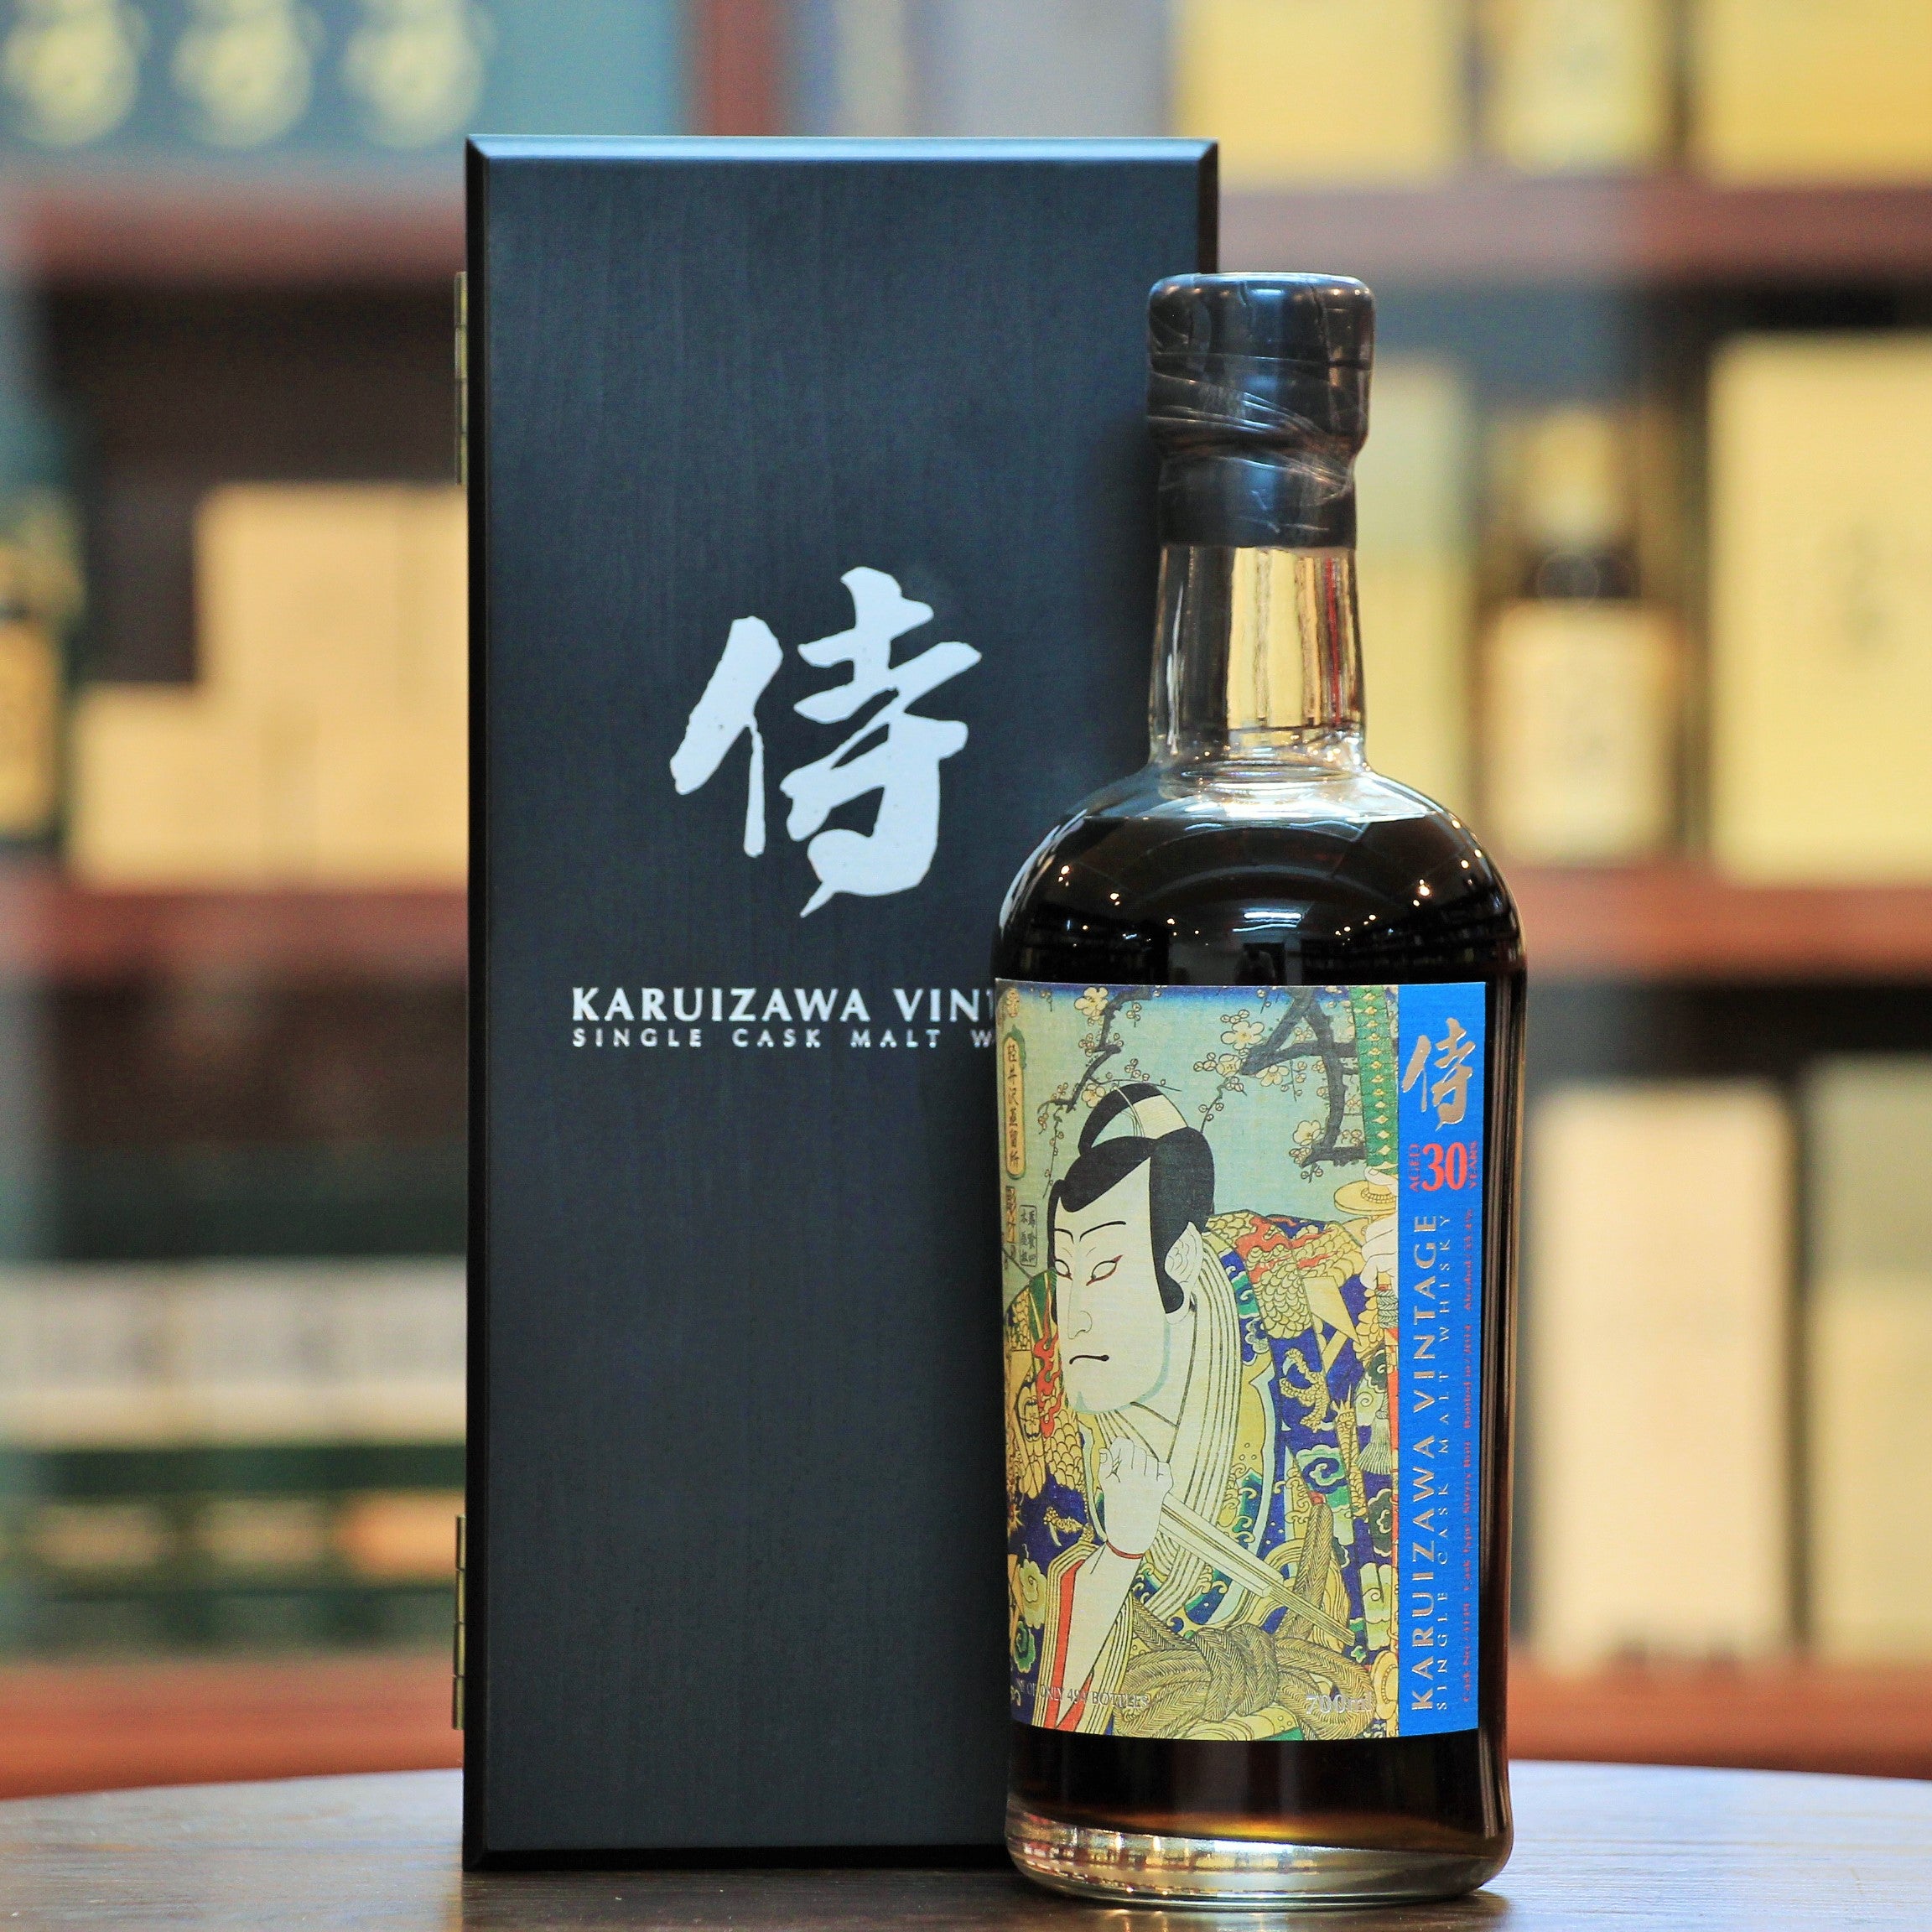 Karuizawa Samurai 30 Years Single Cask 3139 Whisky, Cask #3139. Limited to 494 Bottles. Part of the Samurai Label releases